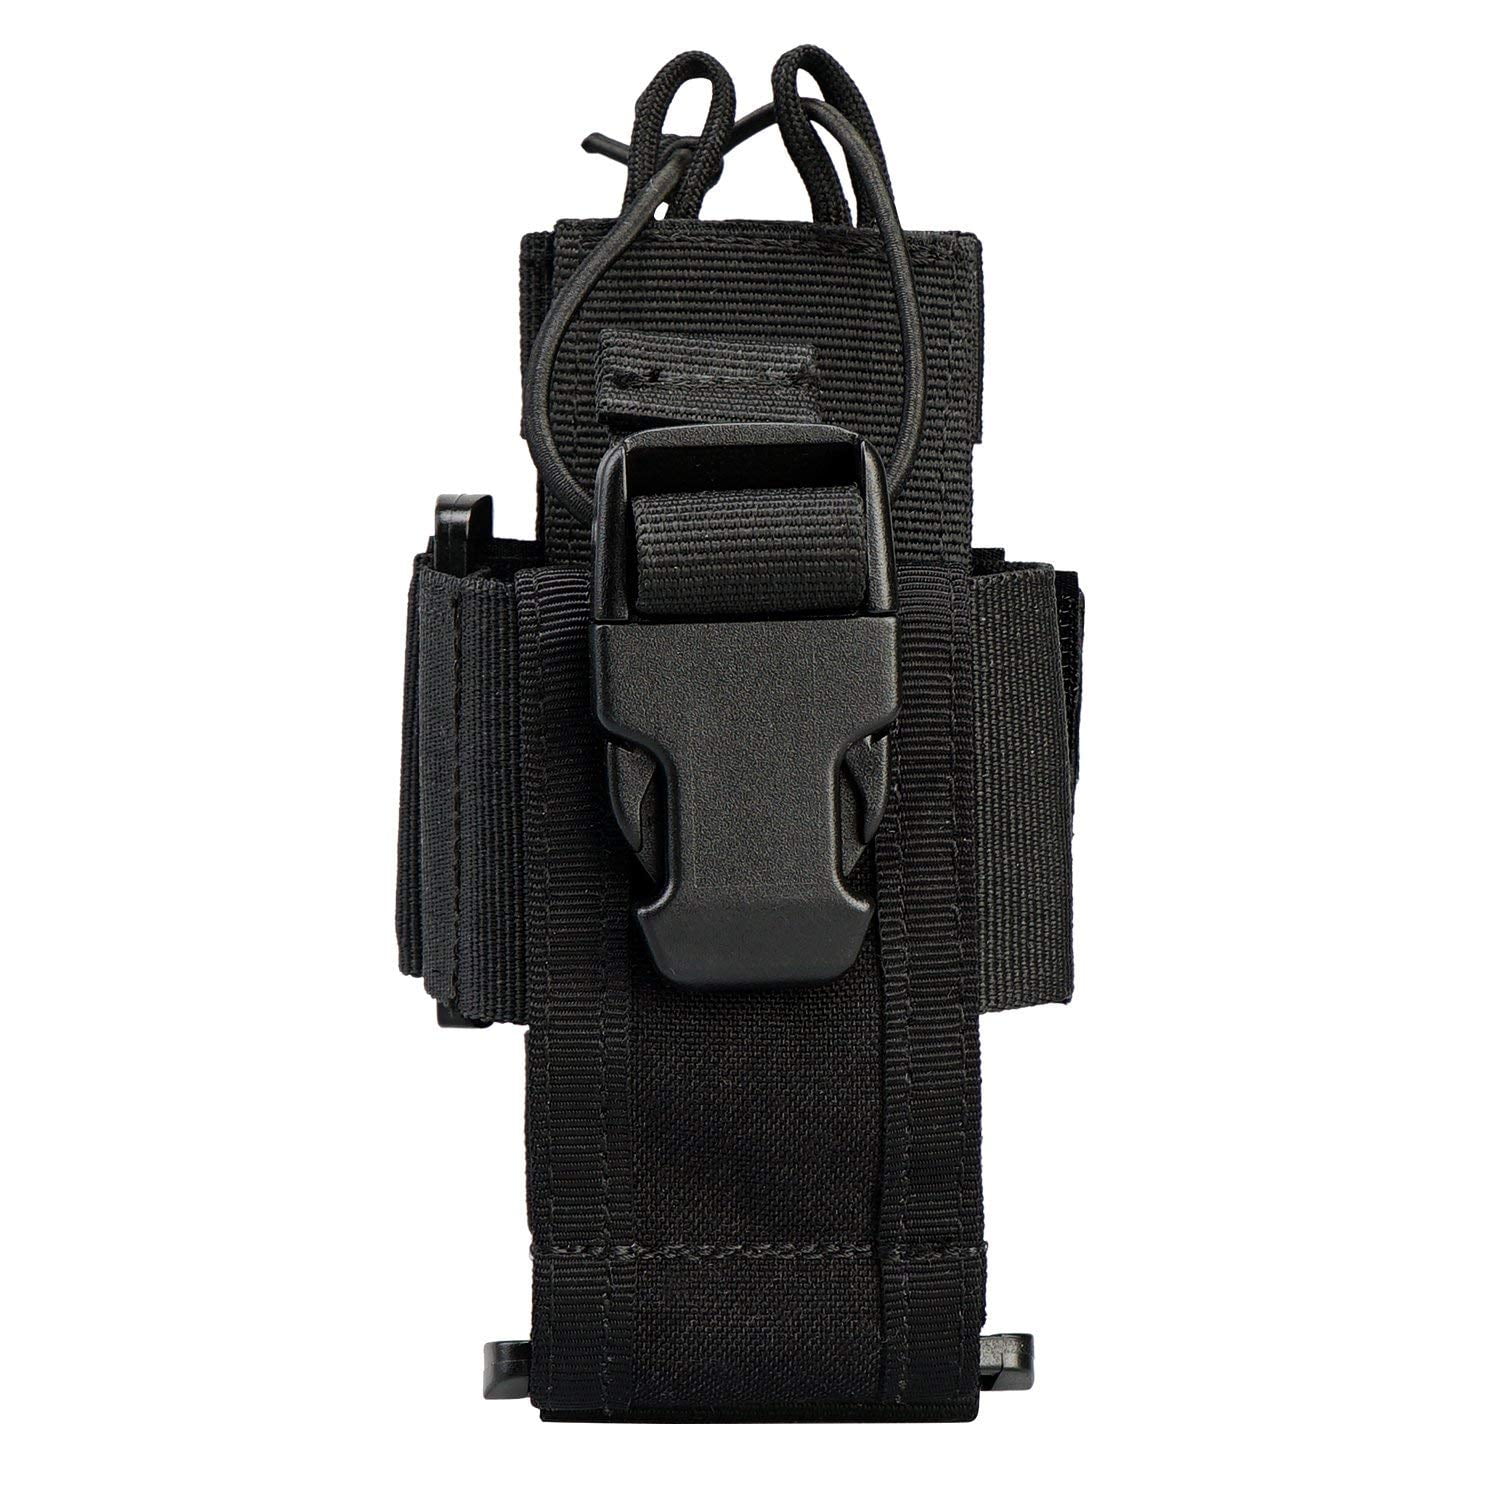 Details about   Tactical Military MOLLE Walkie Holster Waist Belt Bag Radio Talkie Pouch Holder 